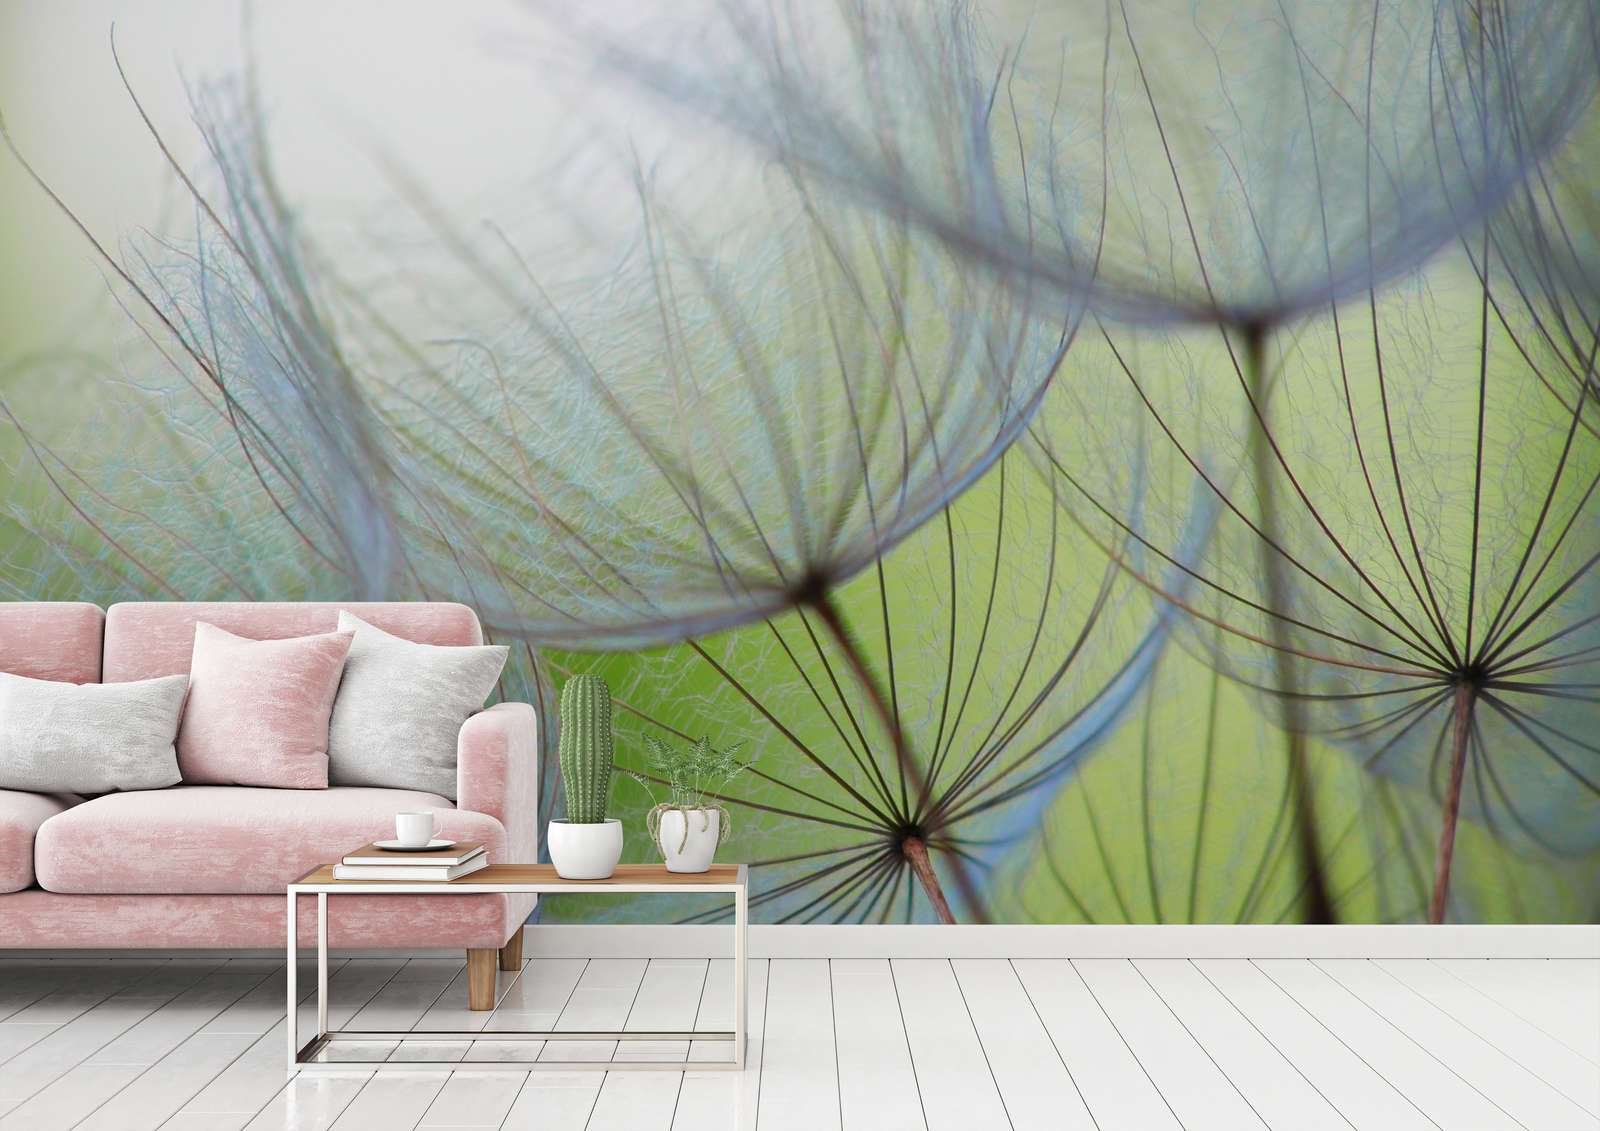             Photo wallpaper detail with dandelions - textured non-woven
        